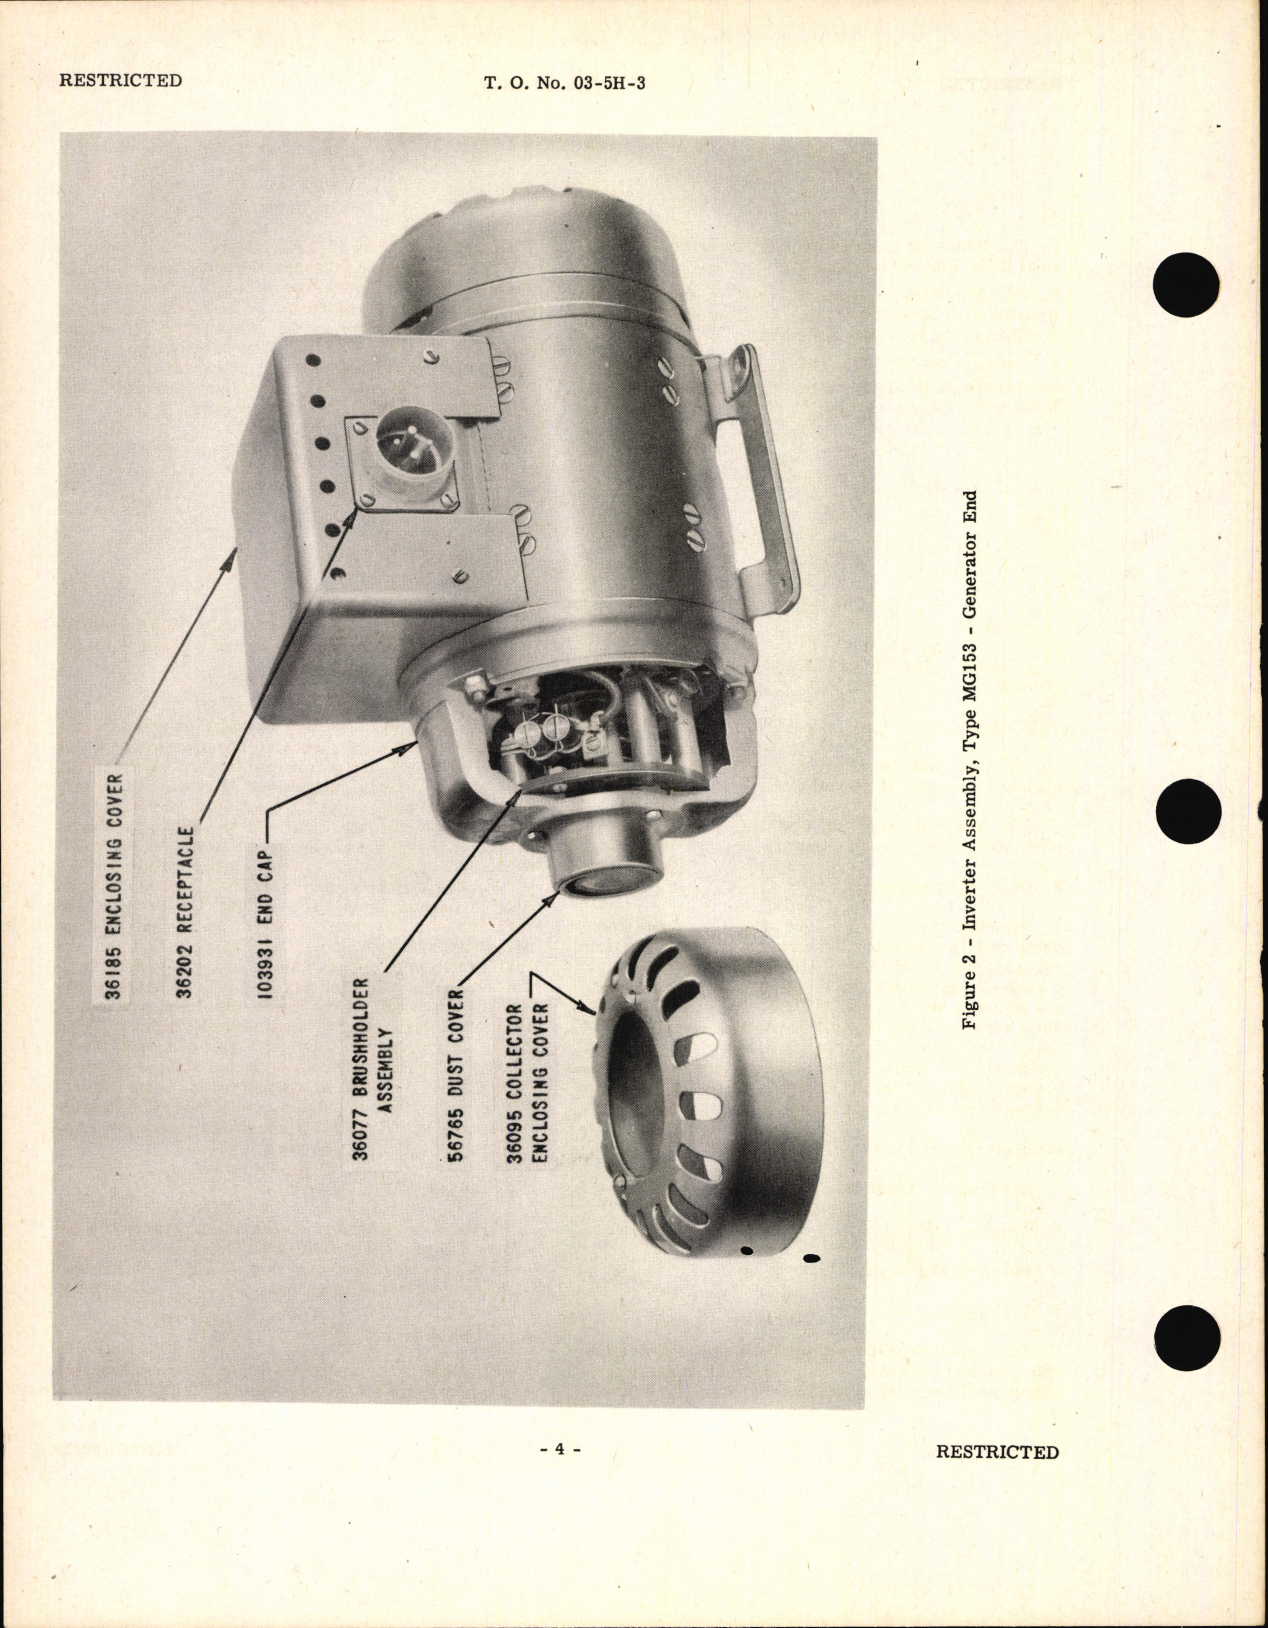 Sample page 6 from AirCorps Library document: Handbook of Instructions with Parts Catalog for Inverter Type MG-153